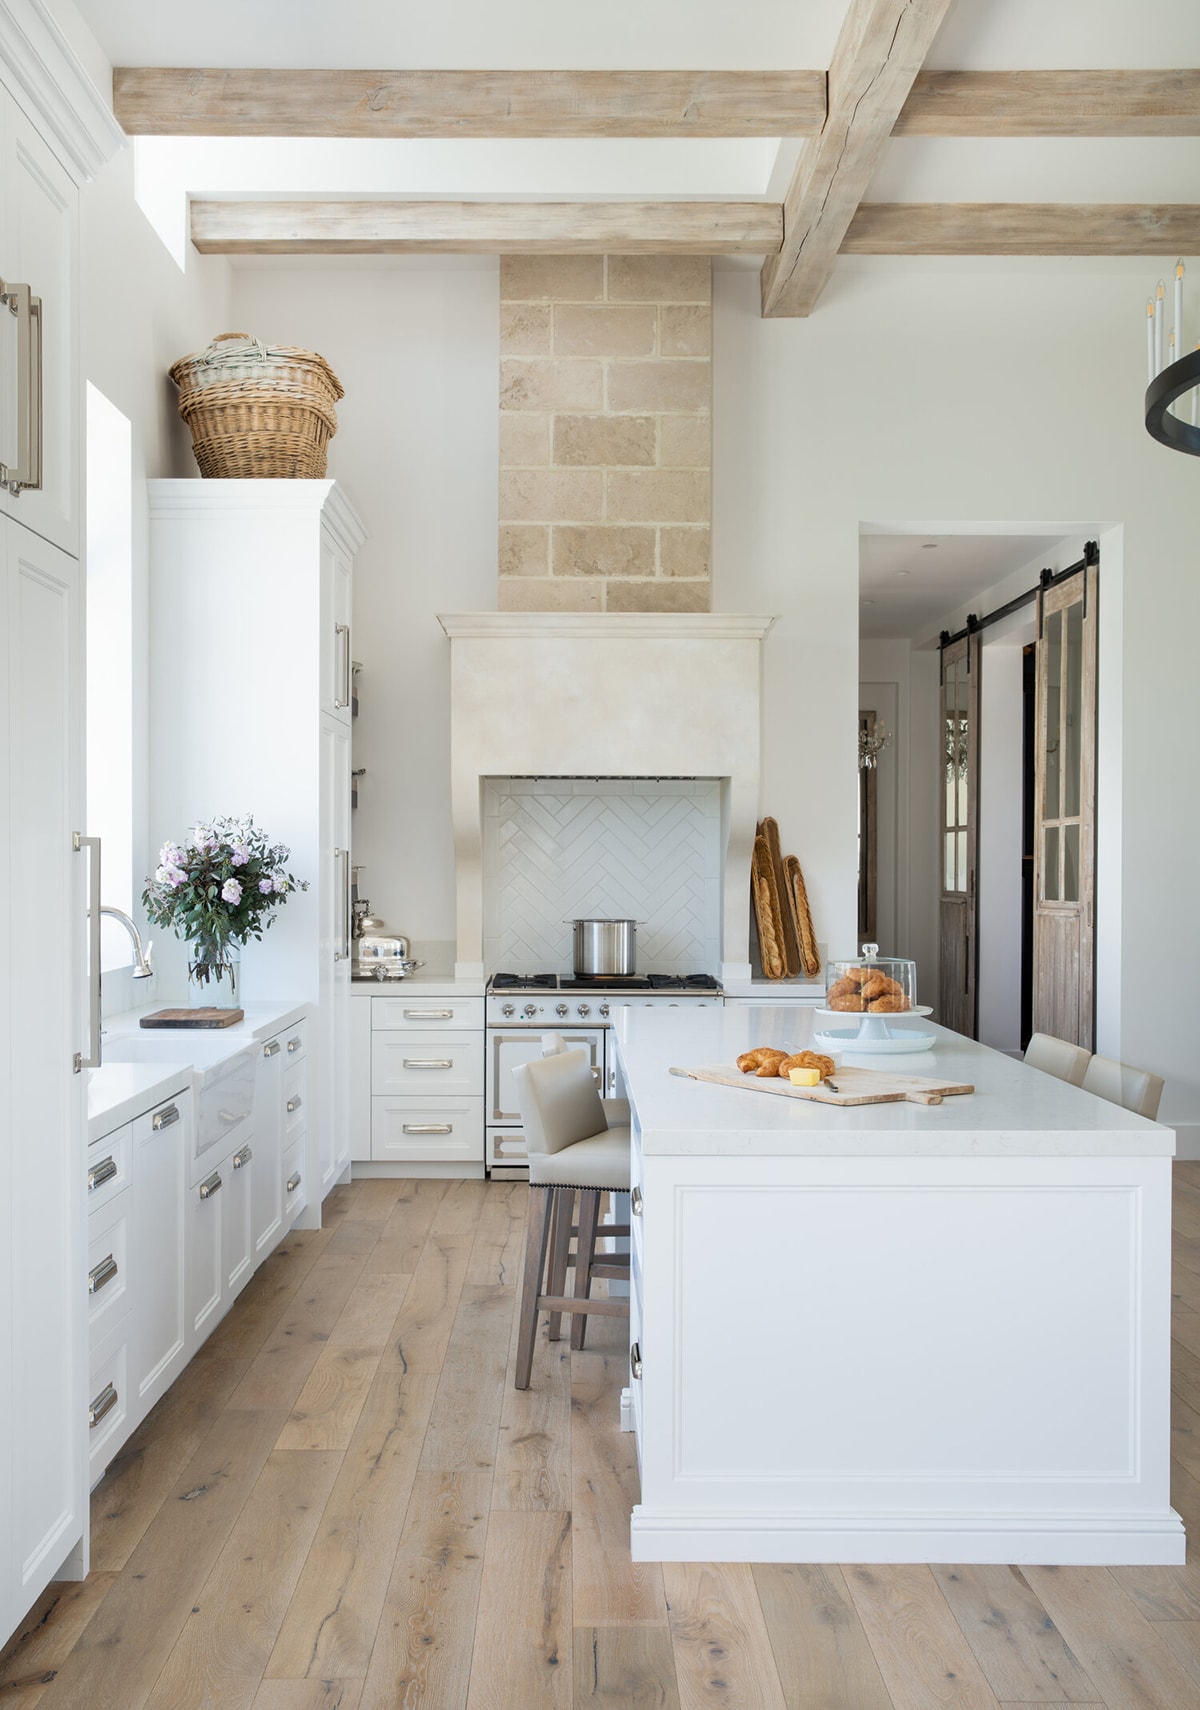 rustic French kitchen with aged stone and beams wood floors